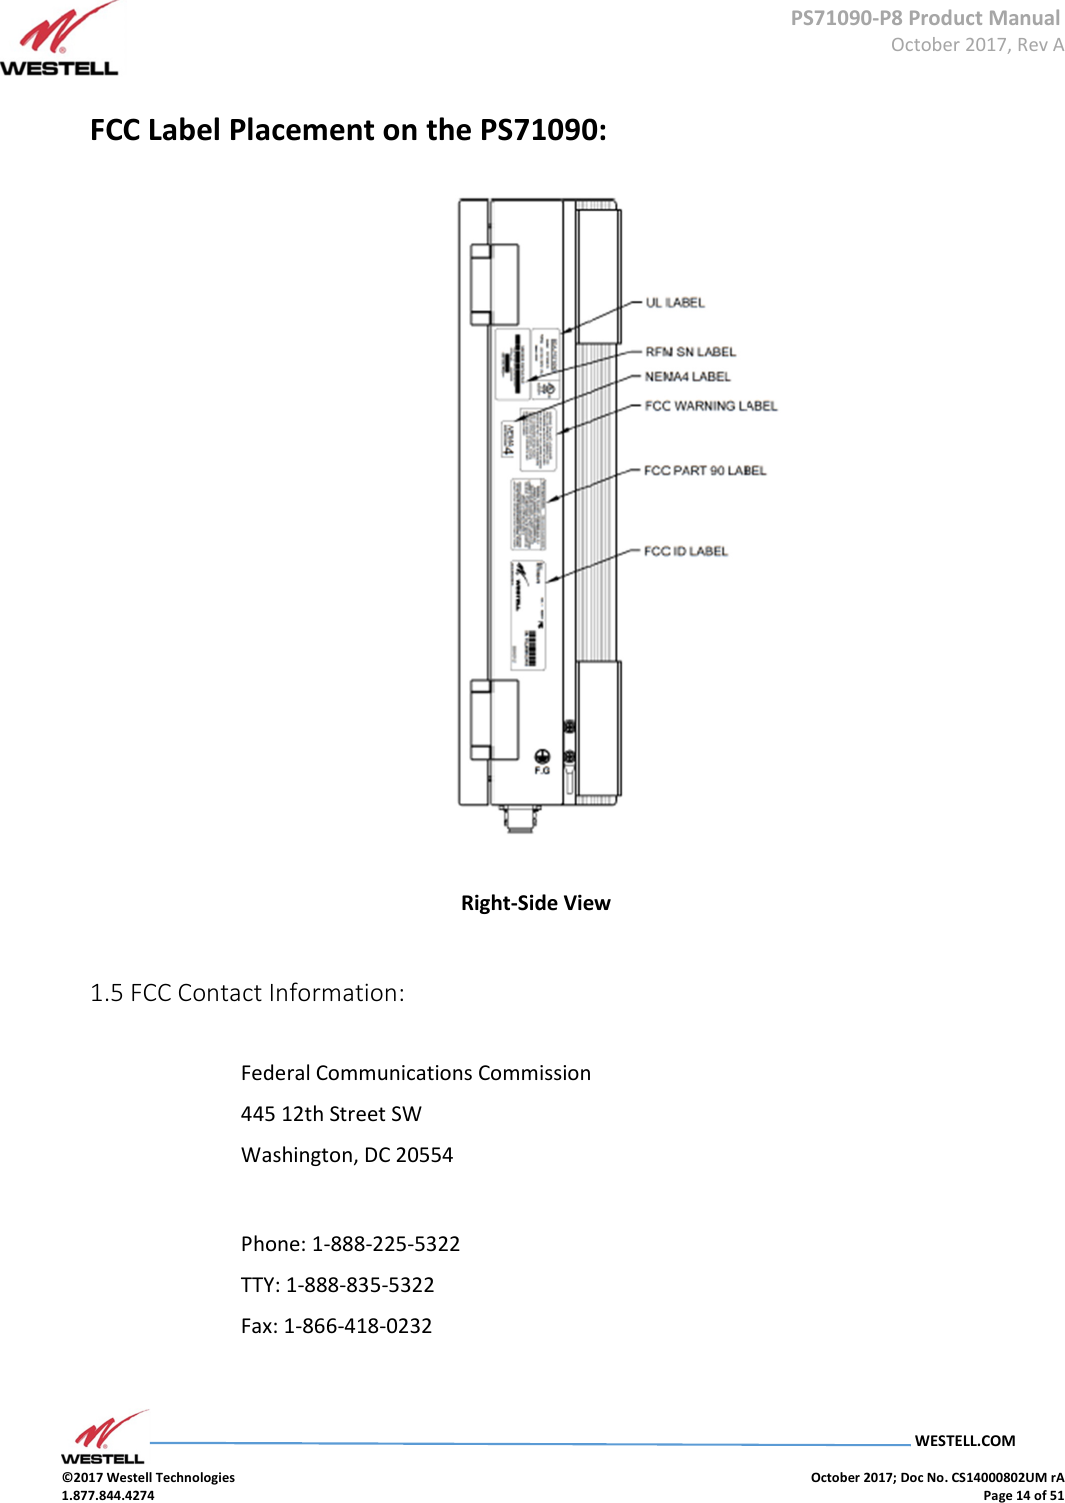      PS71090-P8 Product Manual  October 2017, Rev A  WESTELL.COM  ©2017 Westell Technologies    October 2017; Doc No. CS14000802UM rA 1.877.844.4274    Page 14 of 51  FCC Label Placement on the PS71090:               Right-Side View     1.5 FCC Contact Information:   Federal Communications Commission  445 12th Street SW  Washington, DC 20554    Phone: 1-888-225-5322  TTY: 1-888-835-5322  Fax: 1-866-418-0232    